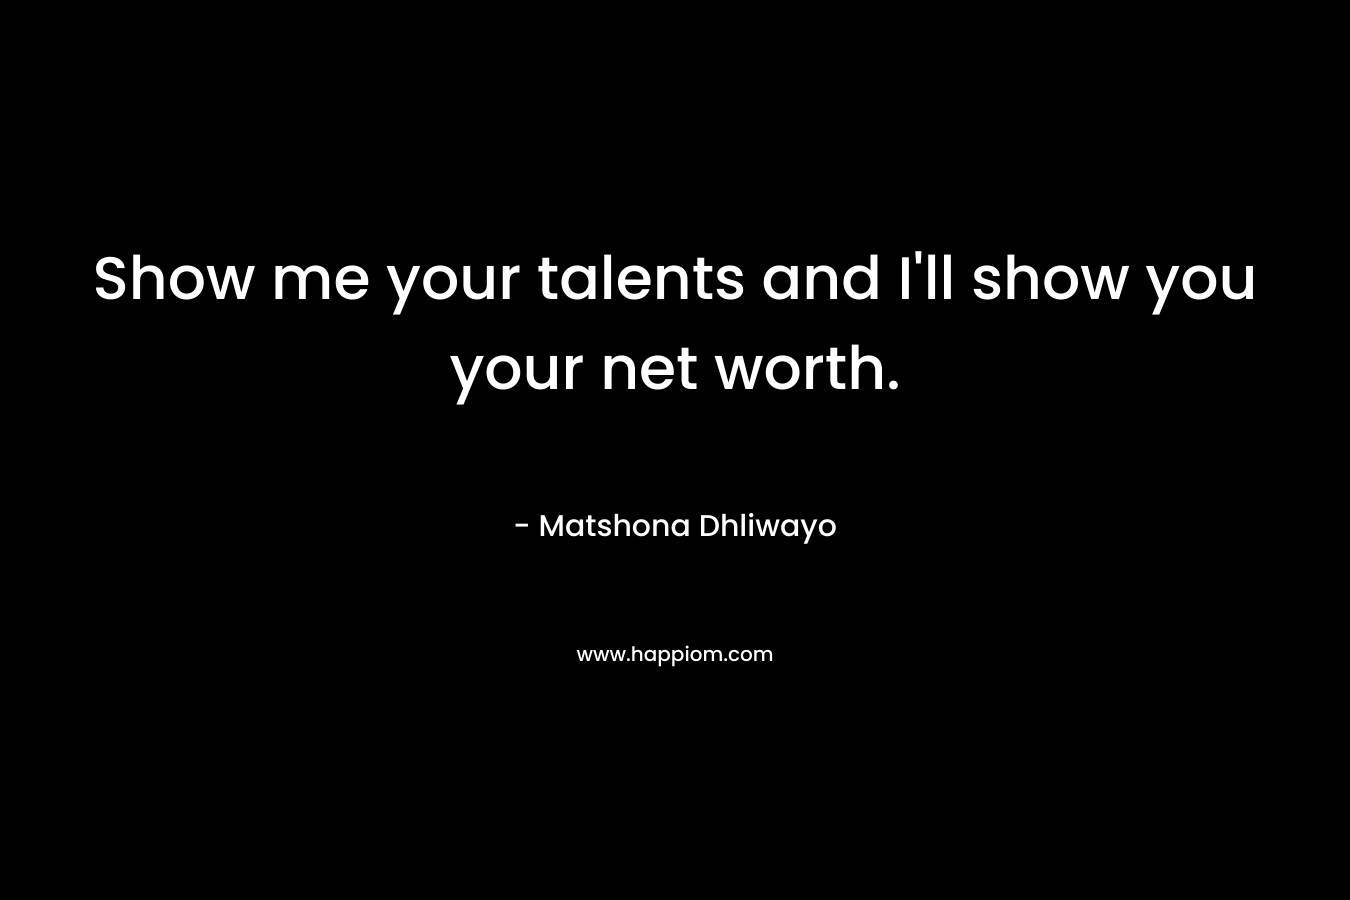 Show me your talents and I'll show you your net worth.